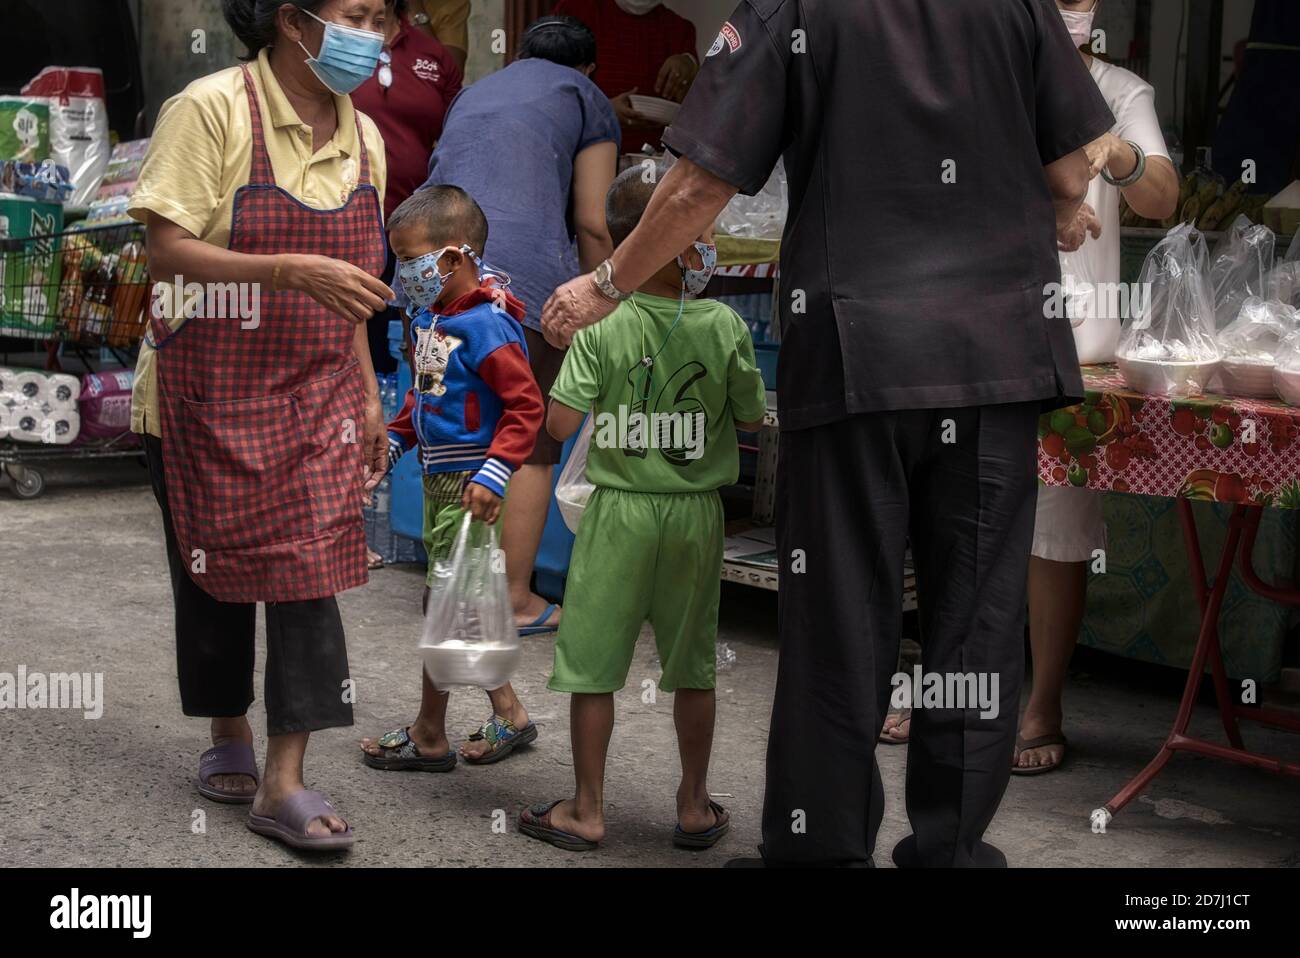 Children receiving free food in celebration of Chulalongkorn Day, King Rama V, Thailand Southeast Asia Stock Photo